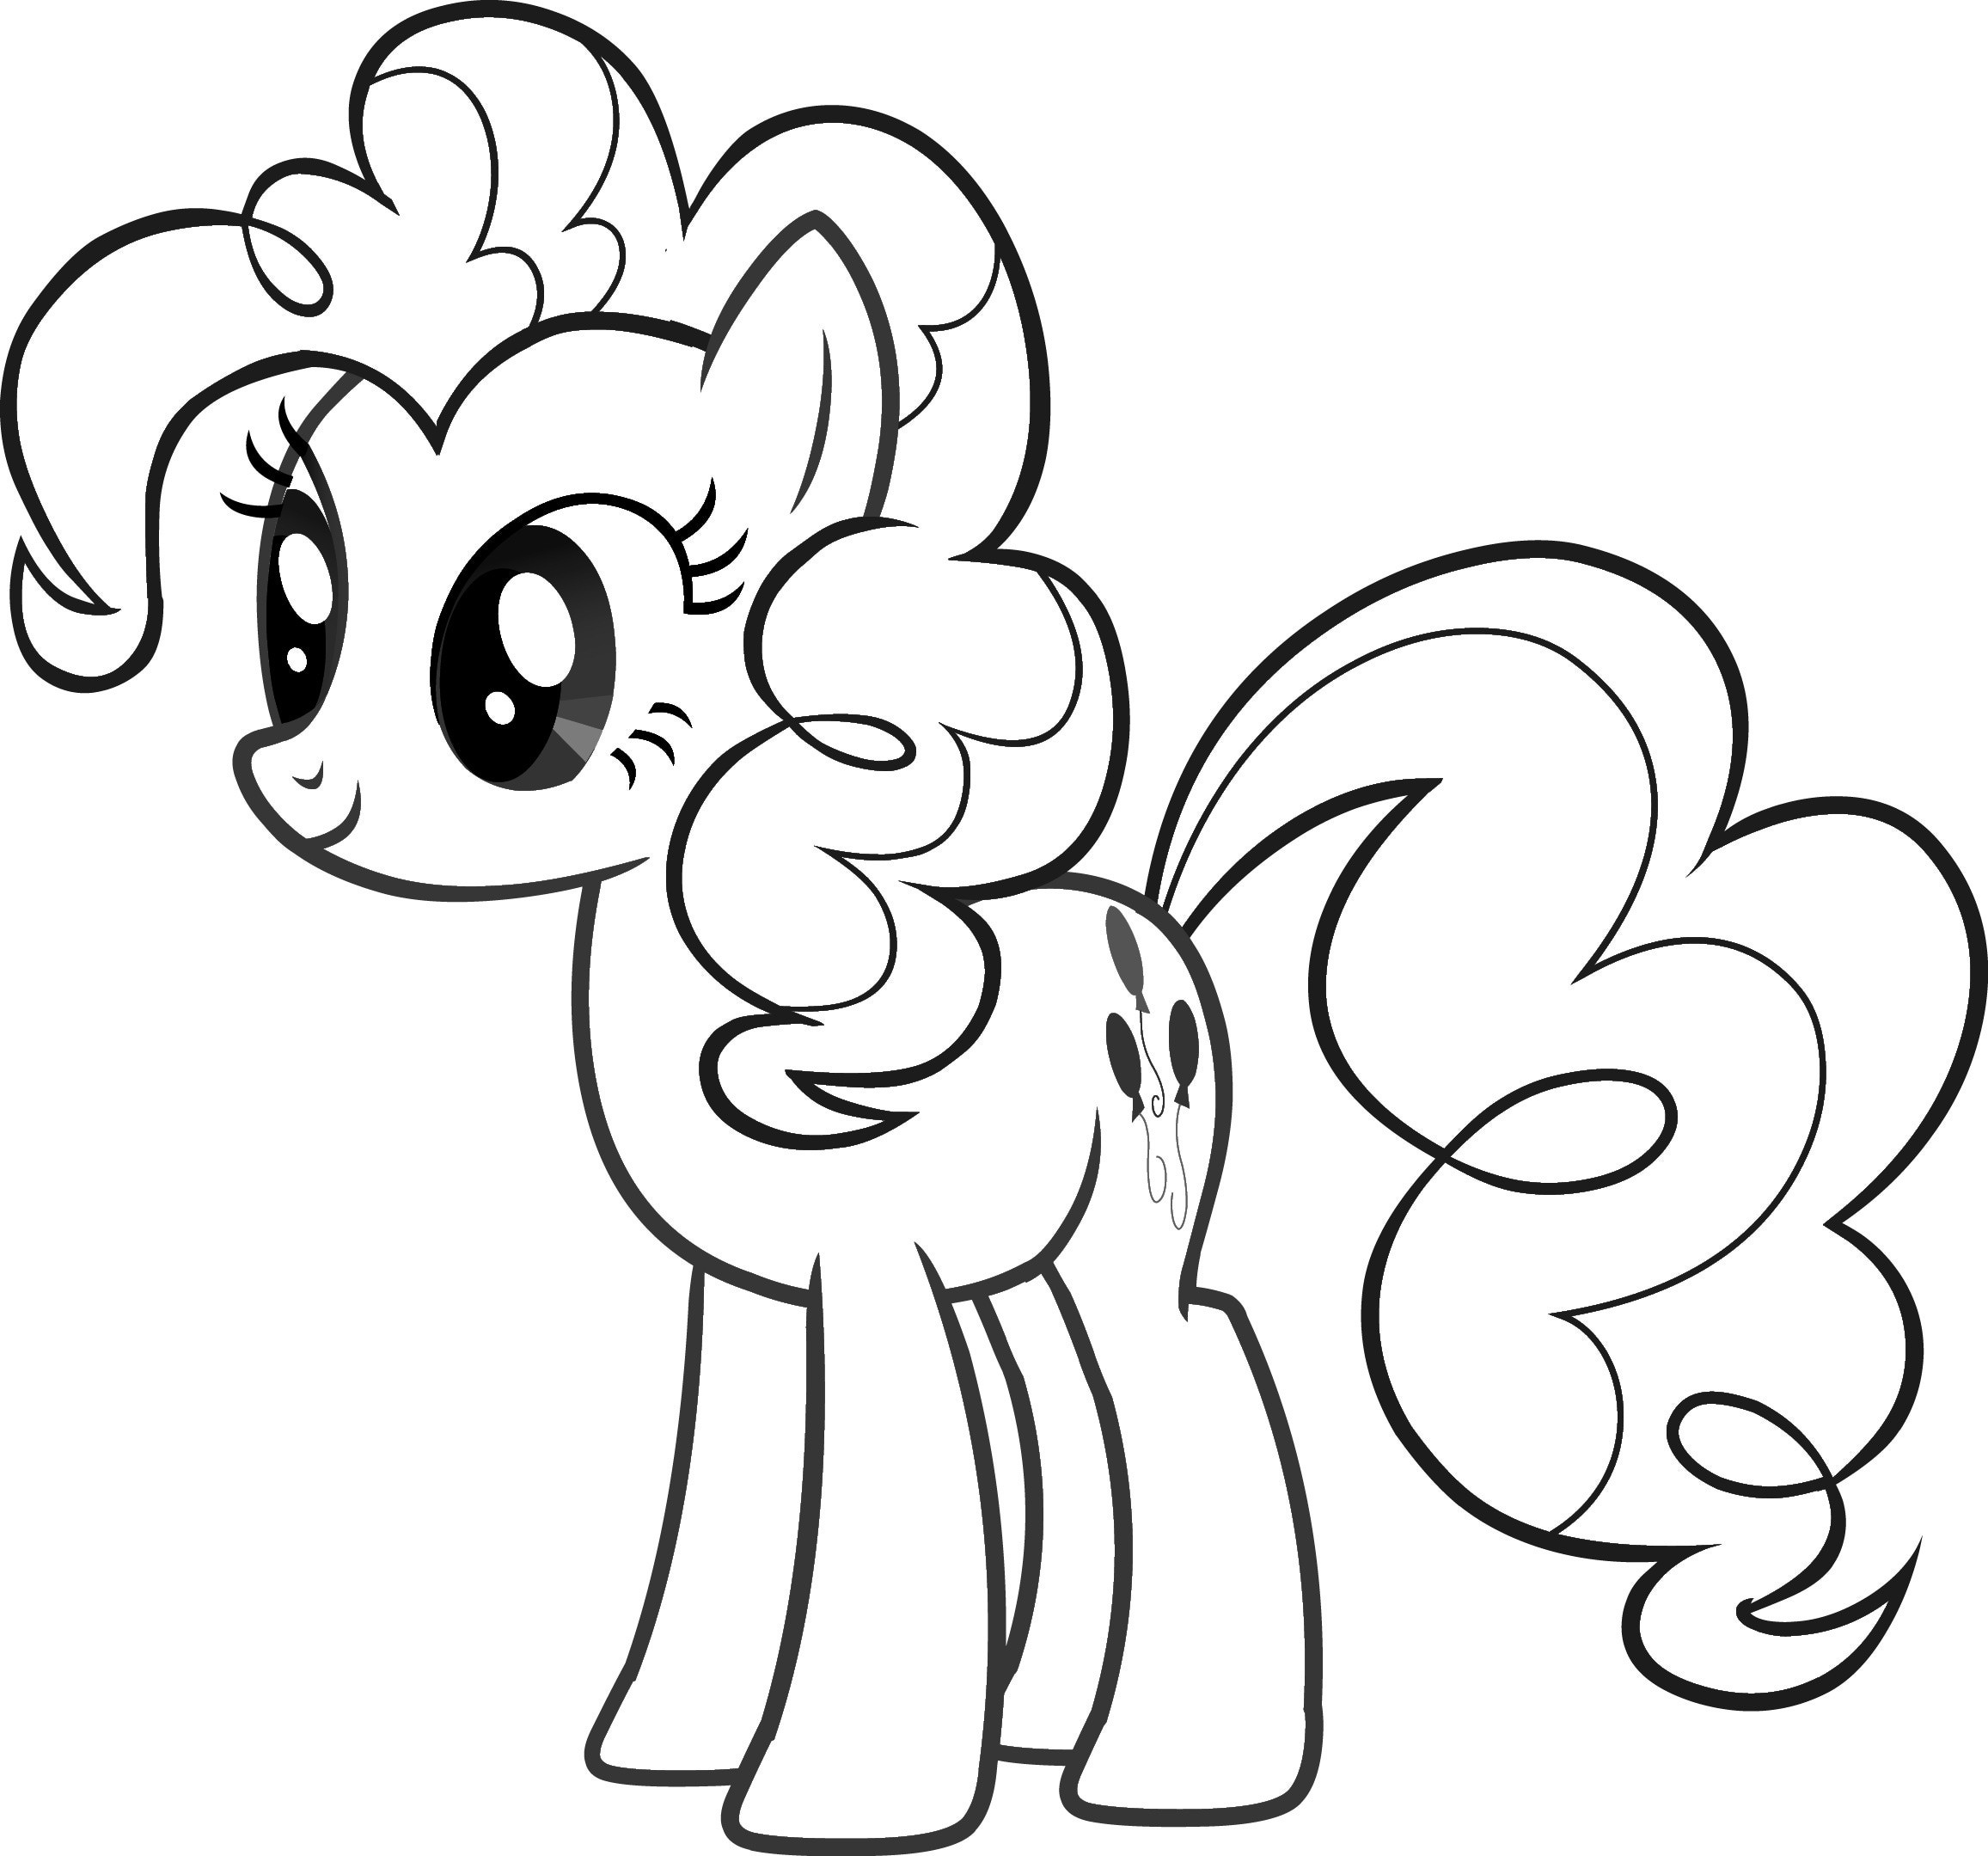 Online Printable Coloring Pages For Girls
 My little pony coloring pages